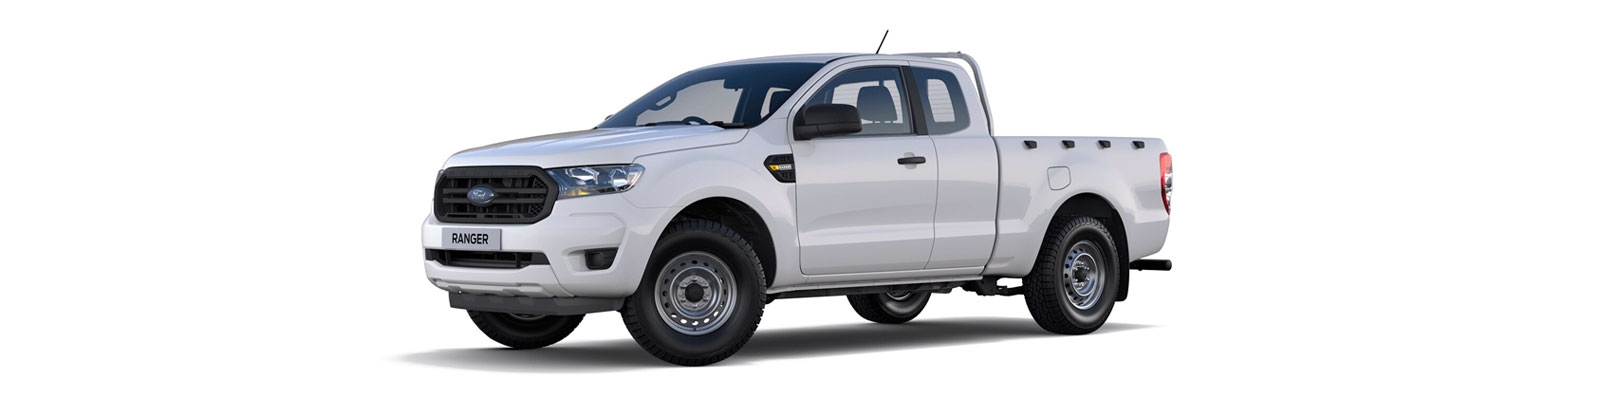 Accessories for the New Super Cab Ranger 2019 Onwards